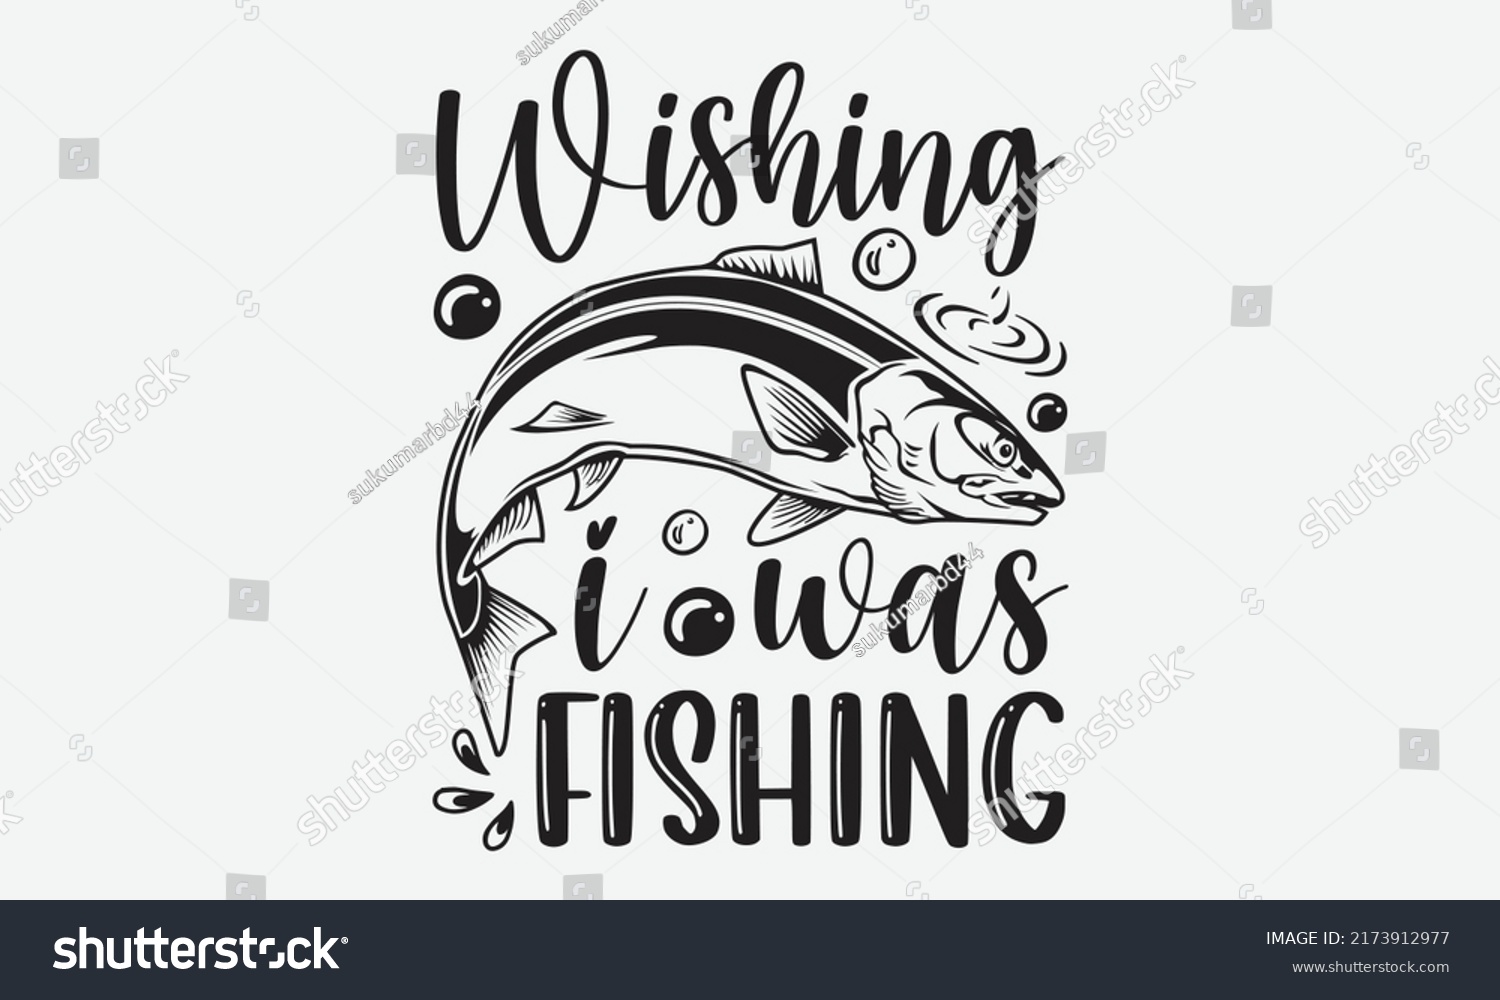 SVG of Wishing I was fishing - Fishing t shirt design, svg eps Files for Cutting, Handmade calligraphy vector illustration, Hand written vector sign, svg svg